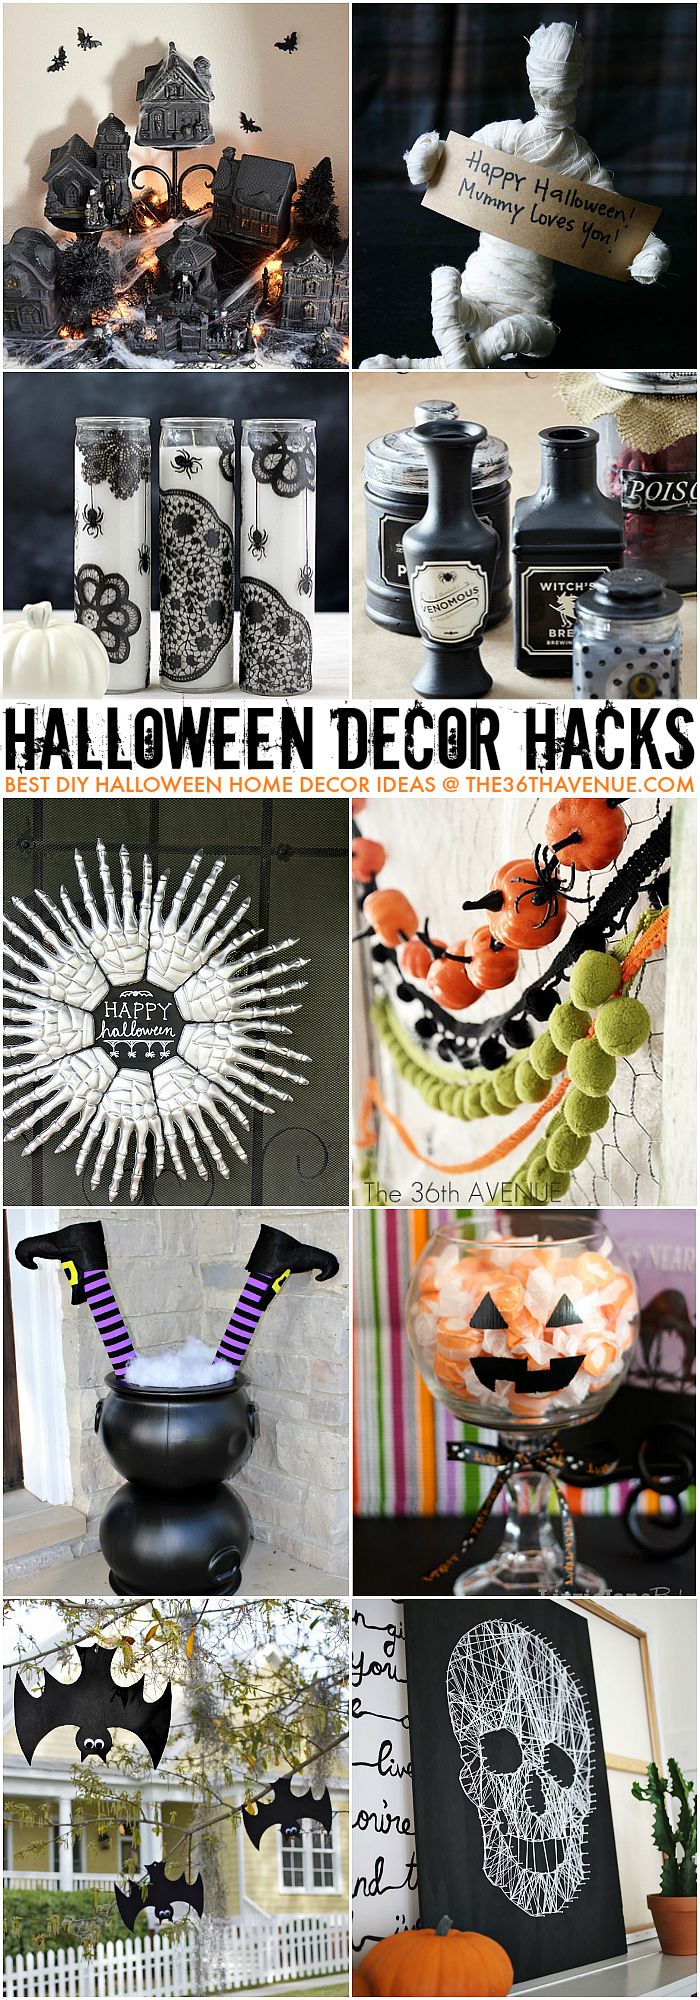 Halloween Decor Ideas and Hacks at the36thavenue.com